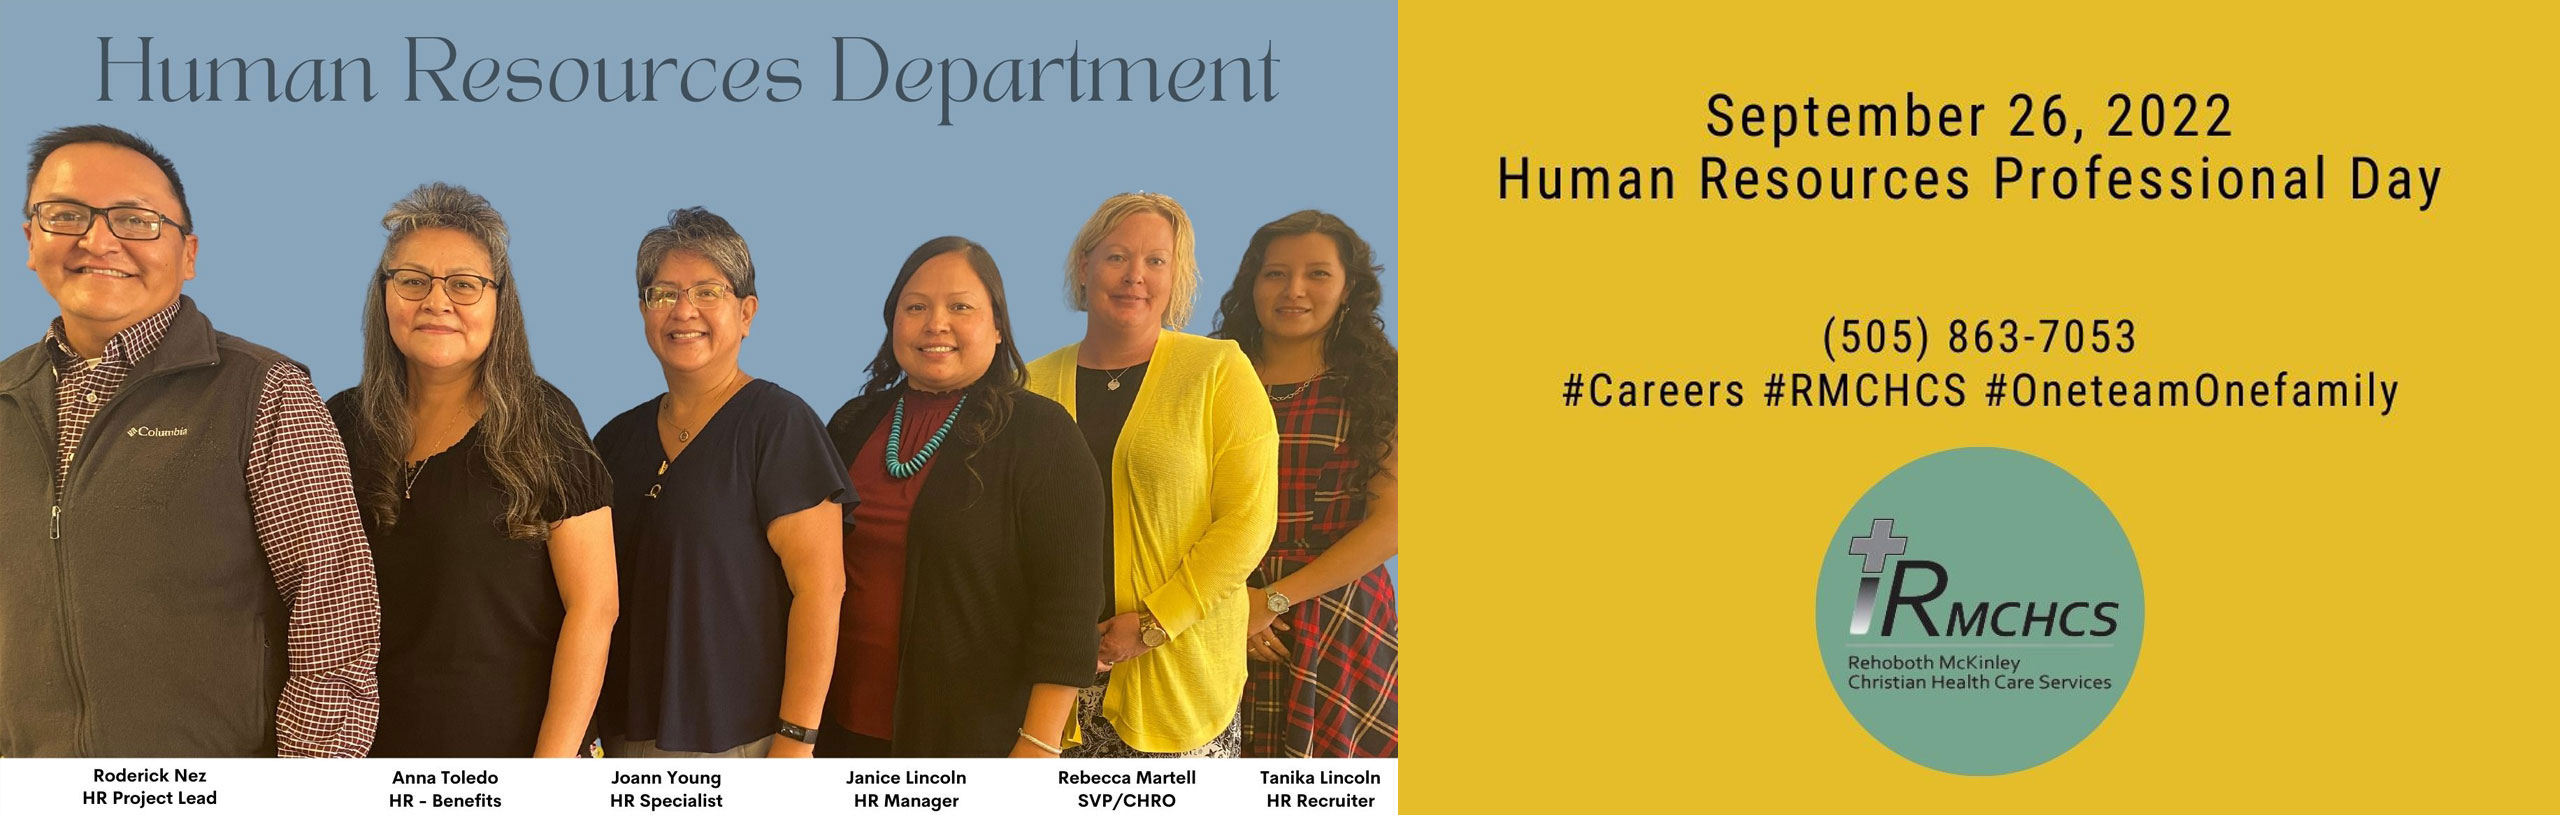 Human Resources Department 
-Roderick Nez (HR Project Lead)
-Anna Toledo (HR-Benefits)
-Joann Young (HR Specialist)
-Janice Lincoln (HR Manager)
-Rebecca Martell (SVP/CHRO)
-Tanika Lincoln (HR Recruiter)

September 26, 2022
Human Resources Professional Day

(505)863-7053

#Careers #RMCHCS #OneTeamOneFamily